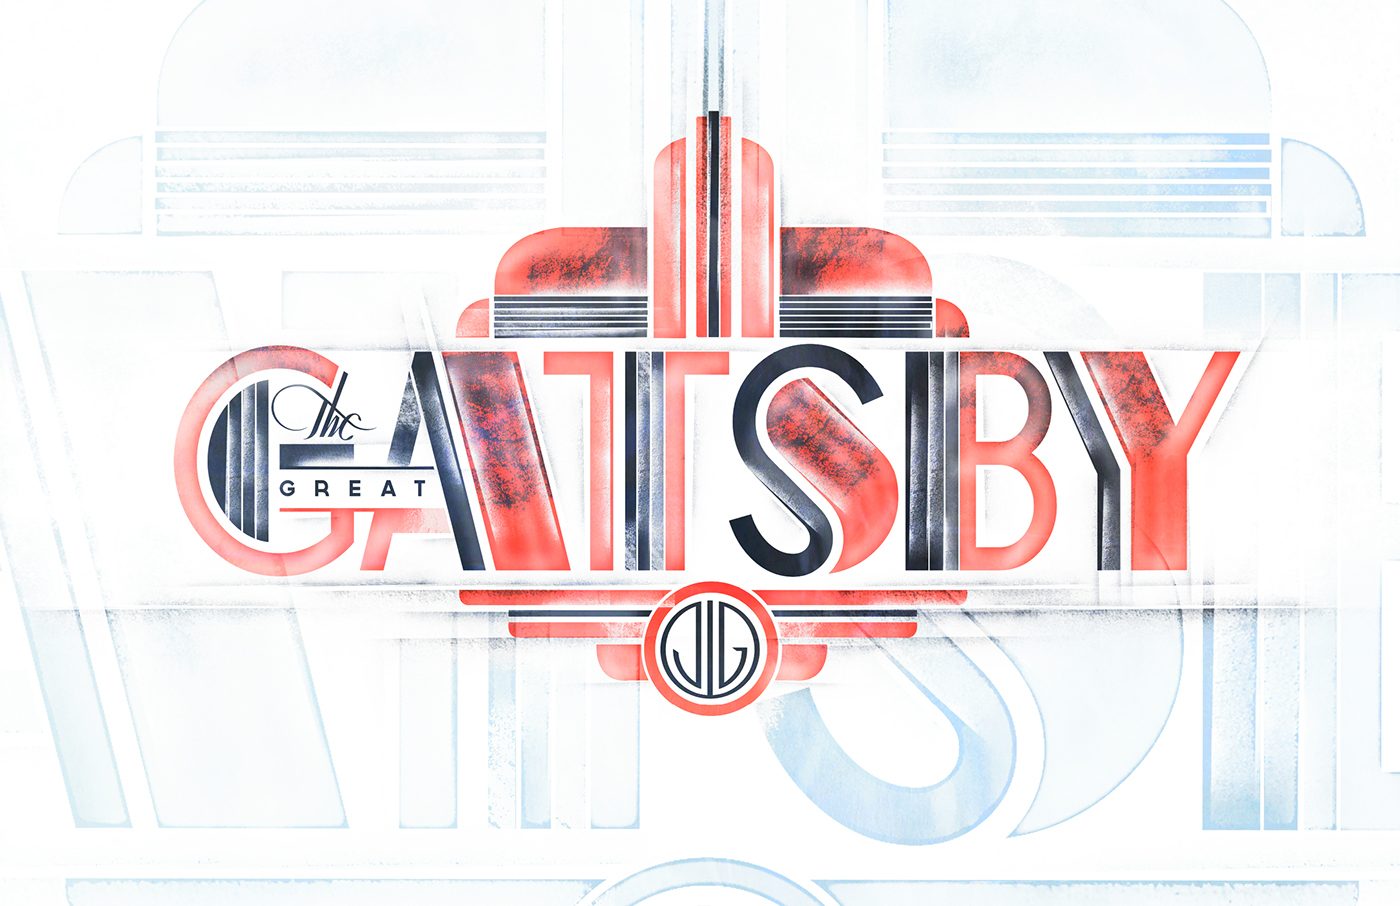 Great Gatsby Logo Concepts